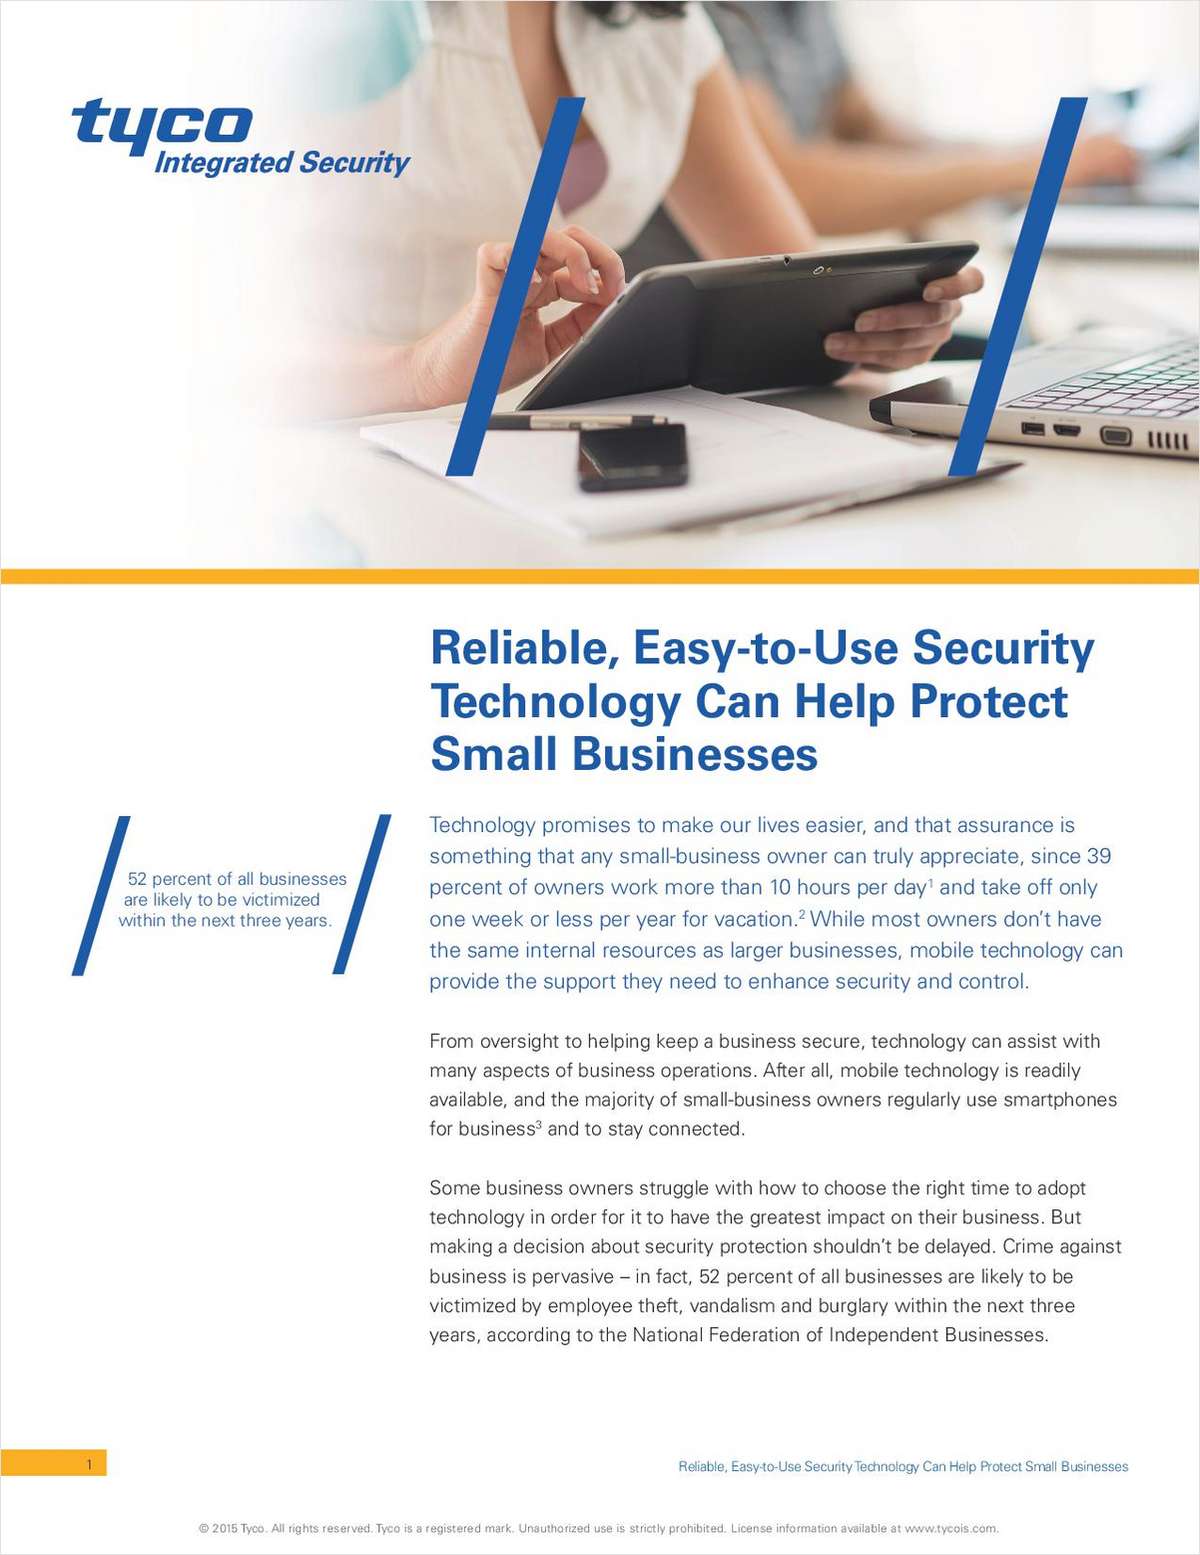 Reliable, Easy-to-Use Security Technology Can Help Protect Small Businesses